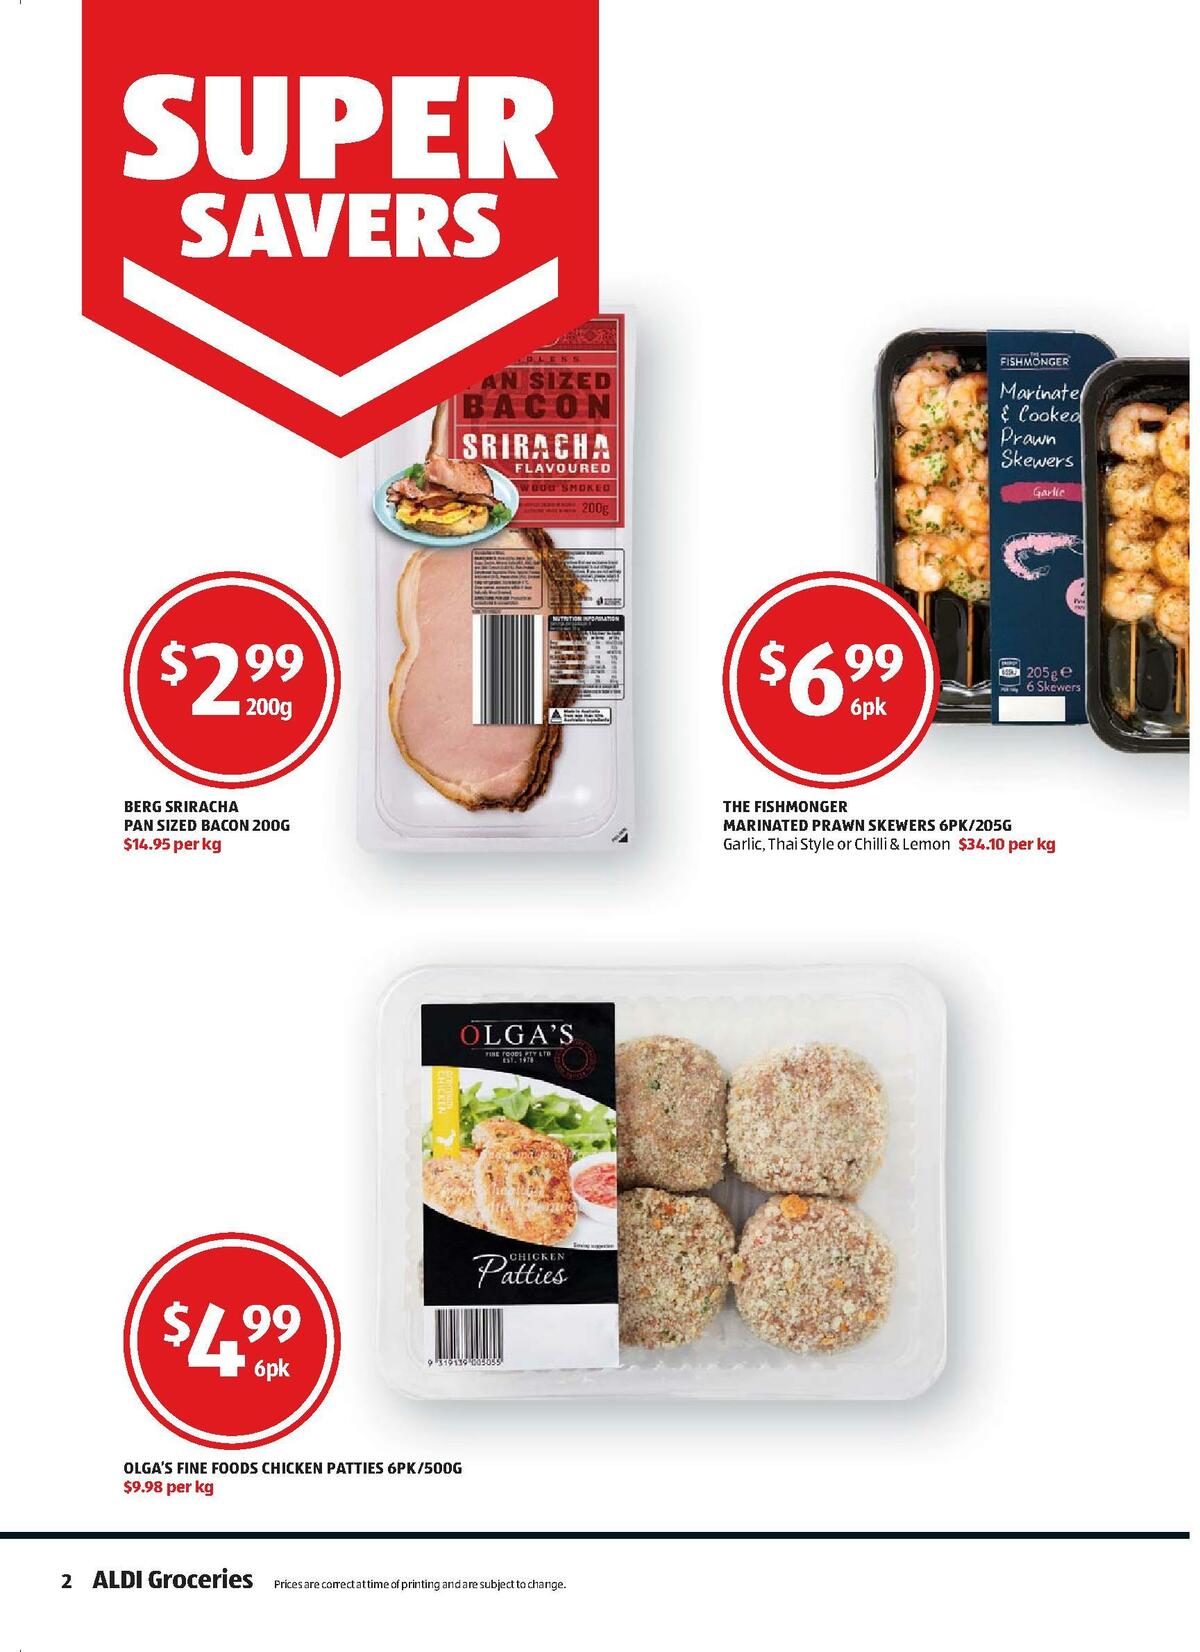 ALDI Catalogues from 29 April